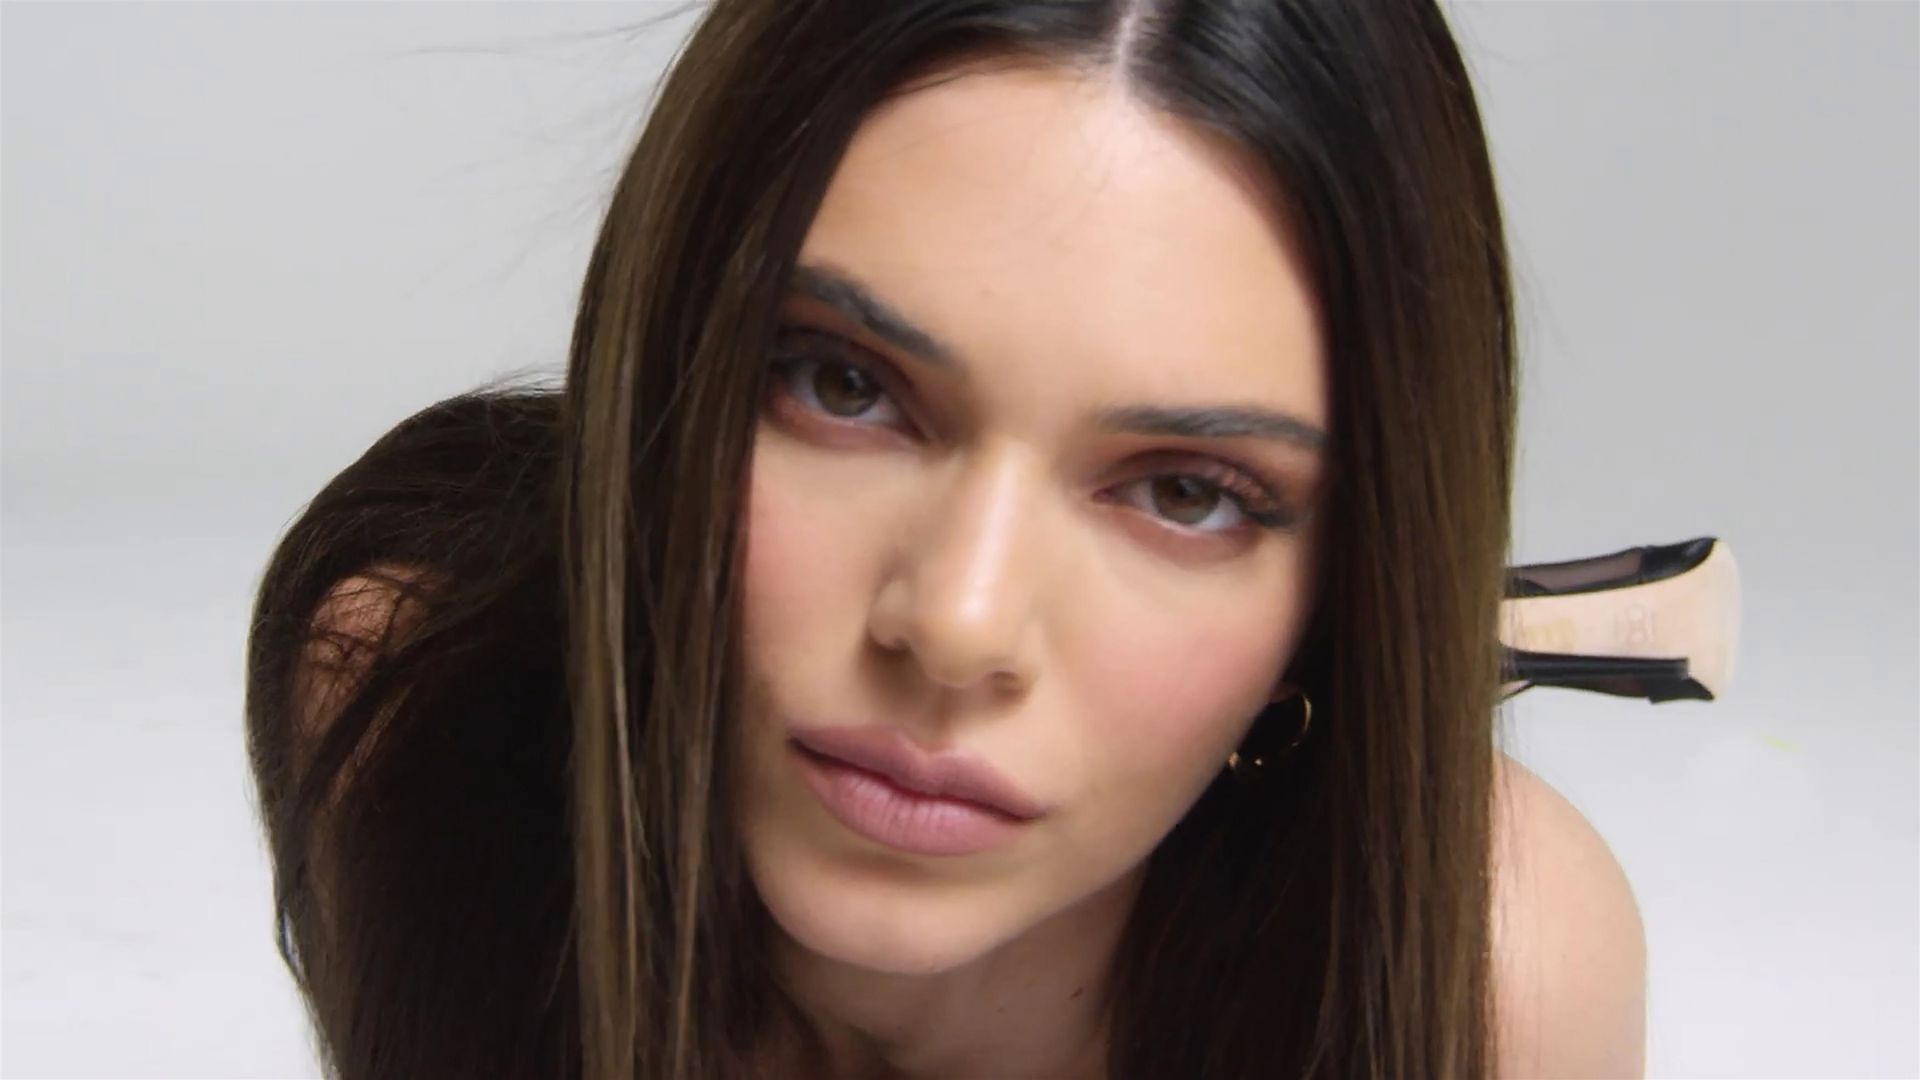 Kendall & Kylie Jenner Present Their New Cosmetic Collection (66 Pics + Video)